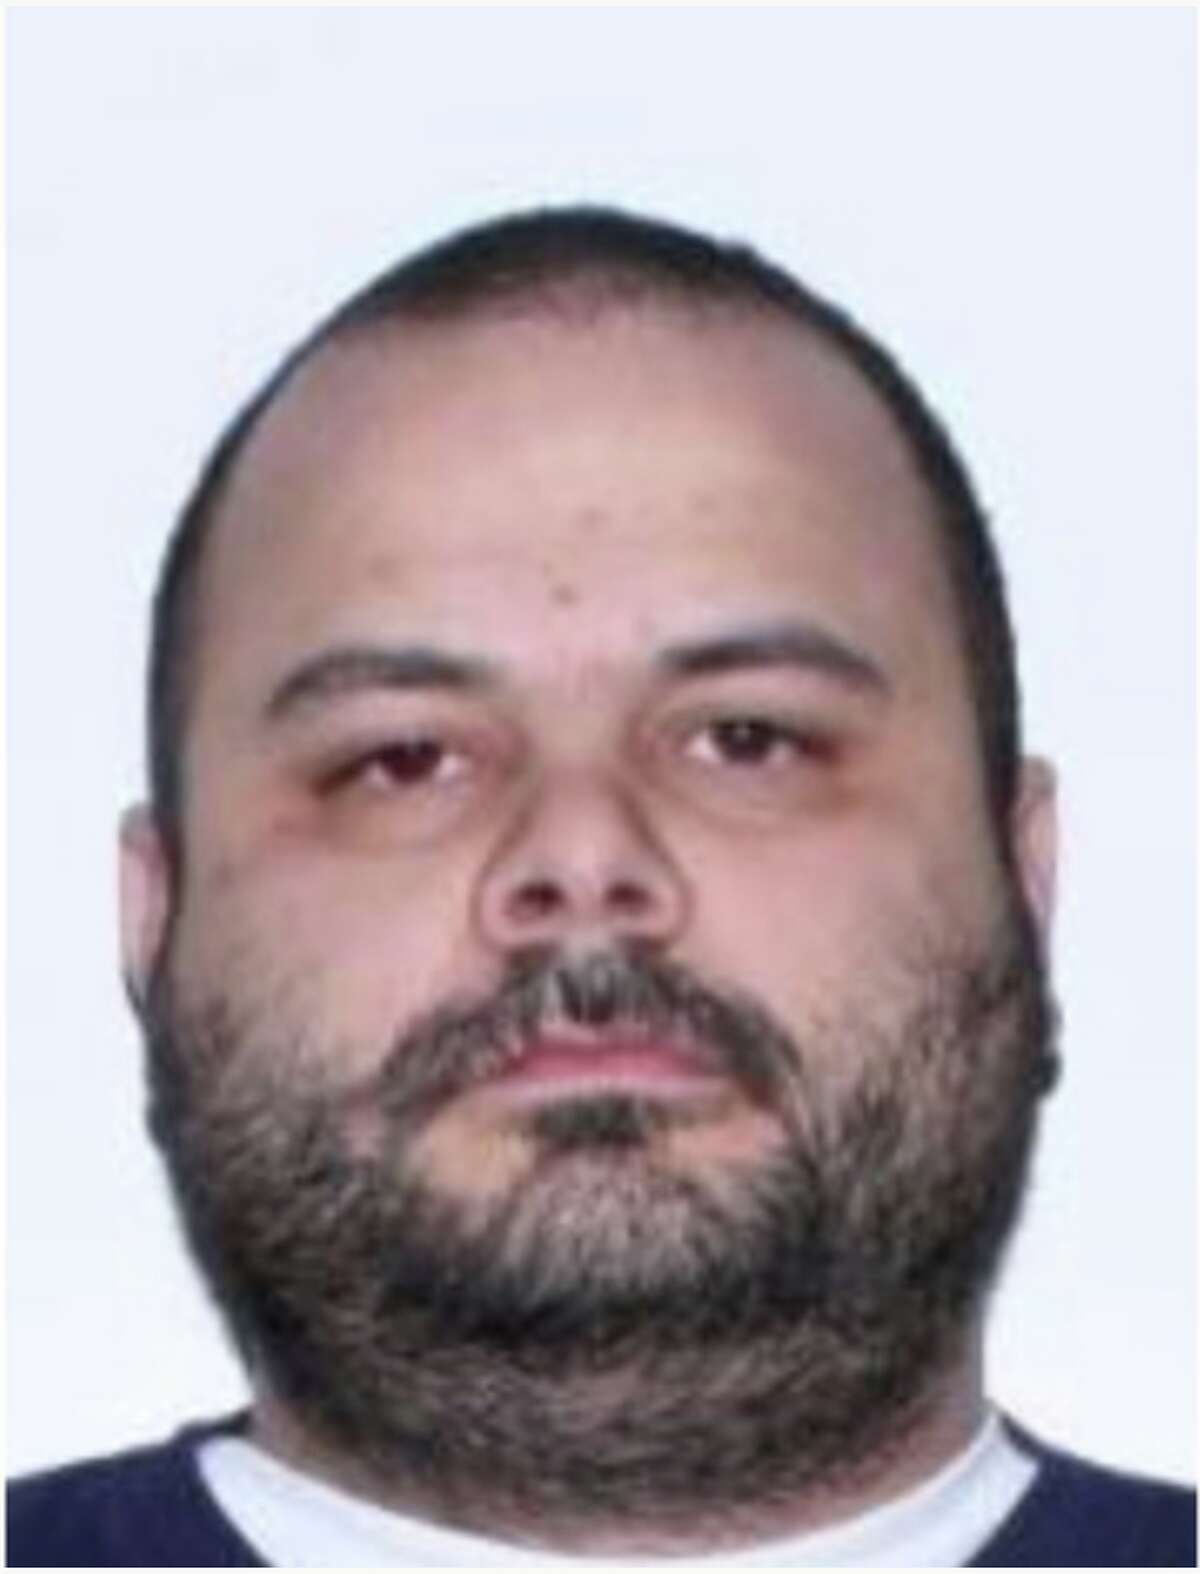 Mihale Leventis of Montreal, known as "Big Mike" and "Rookie," pleaded guilty to conspiracy to import a controlled substance.